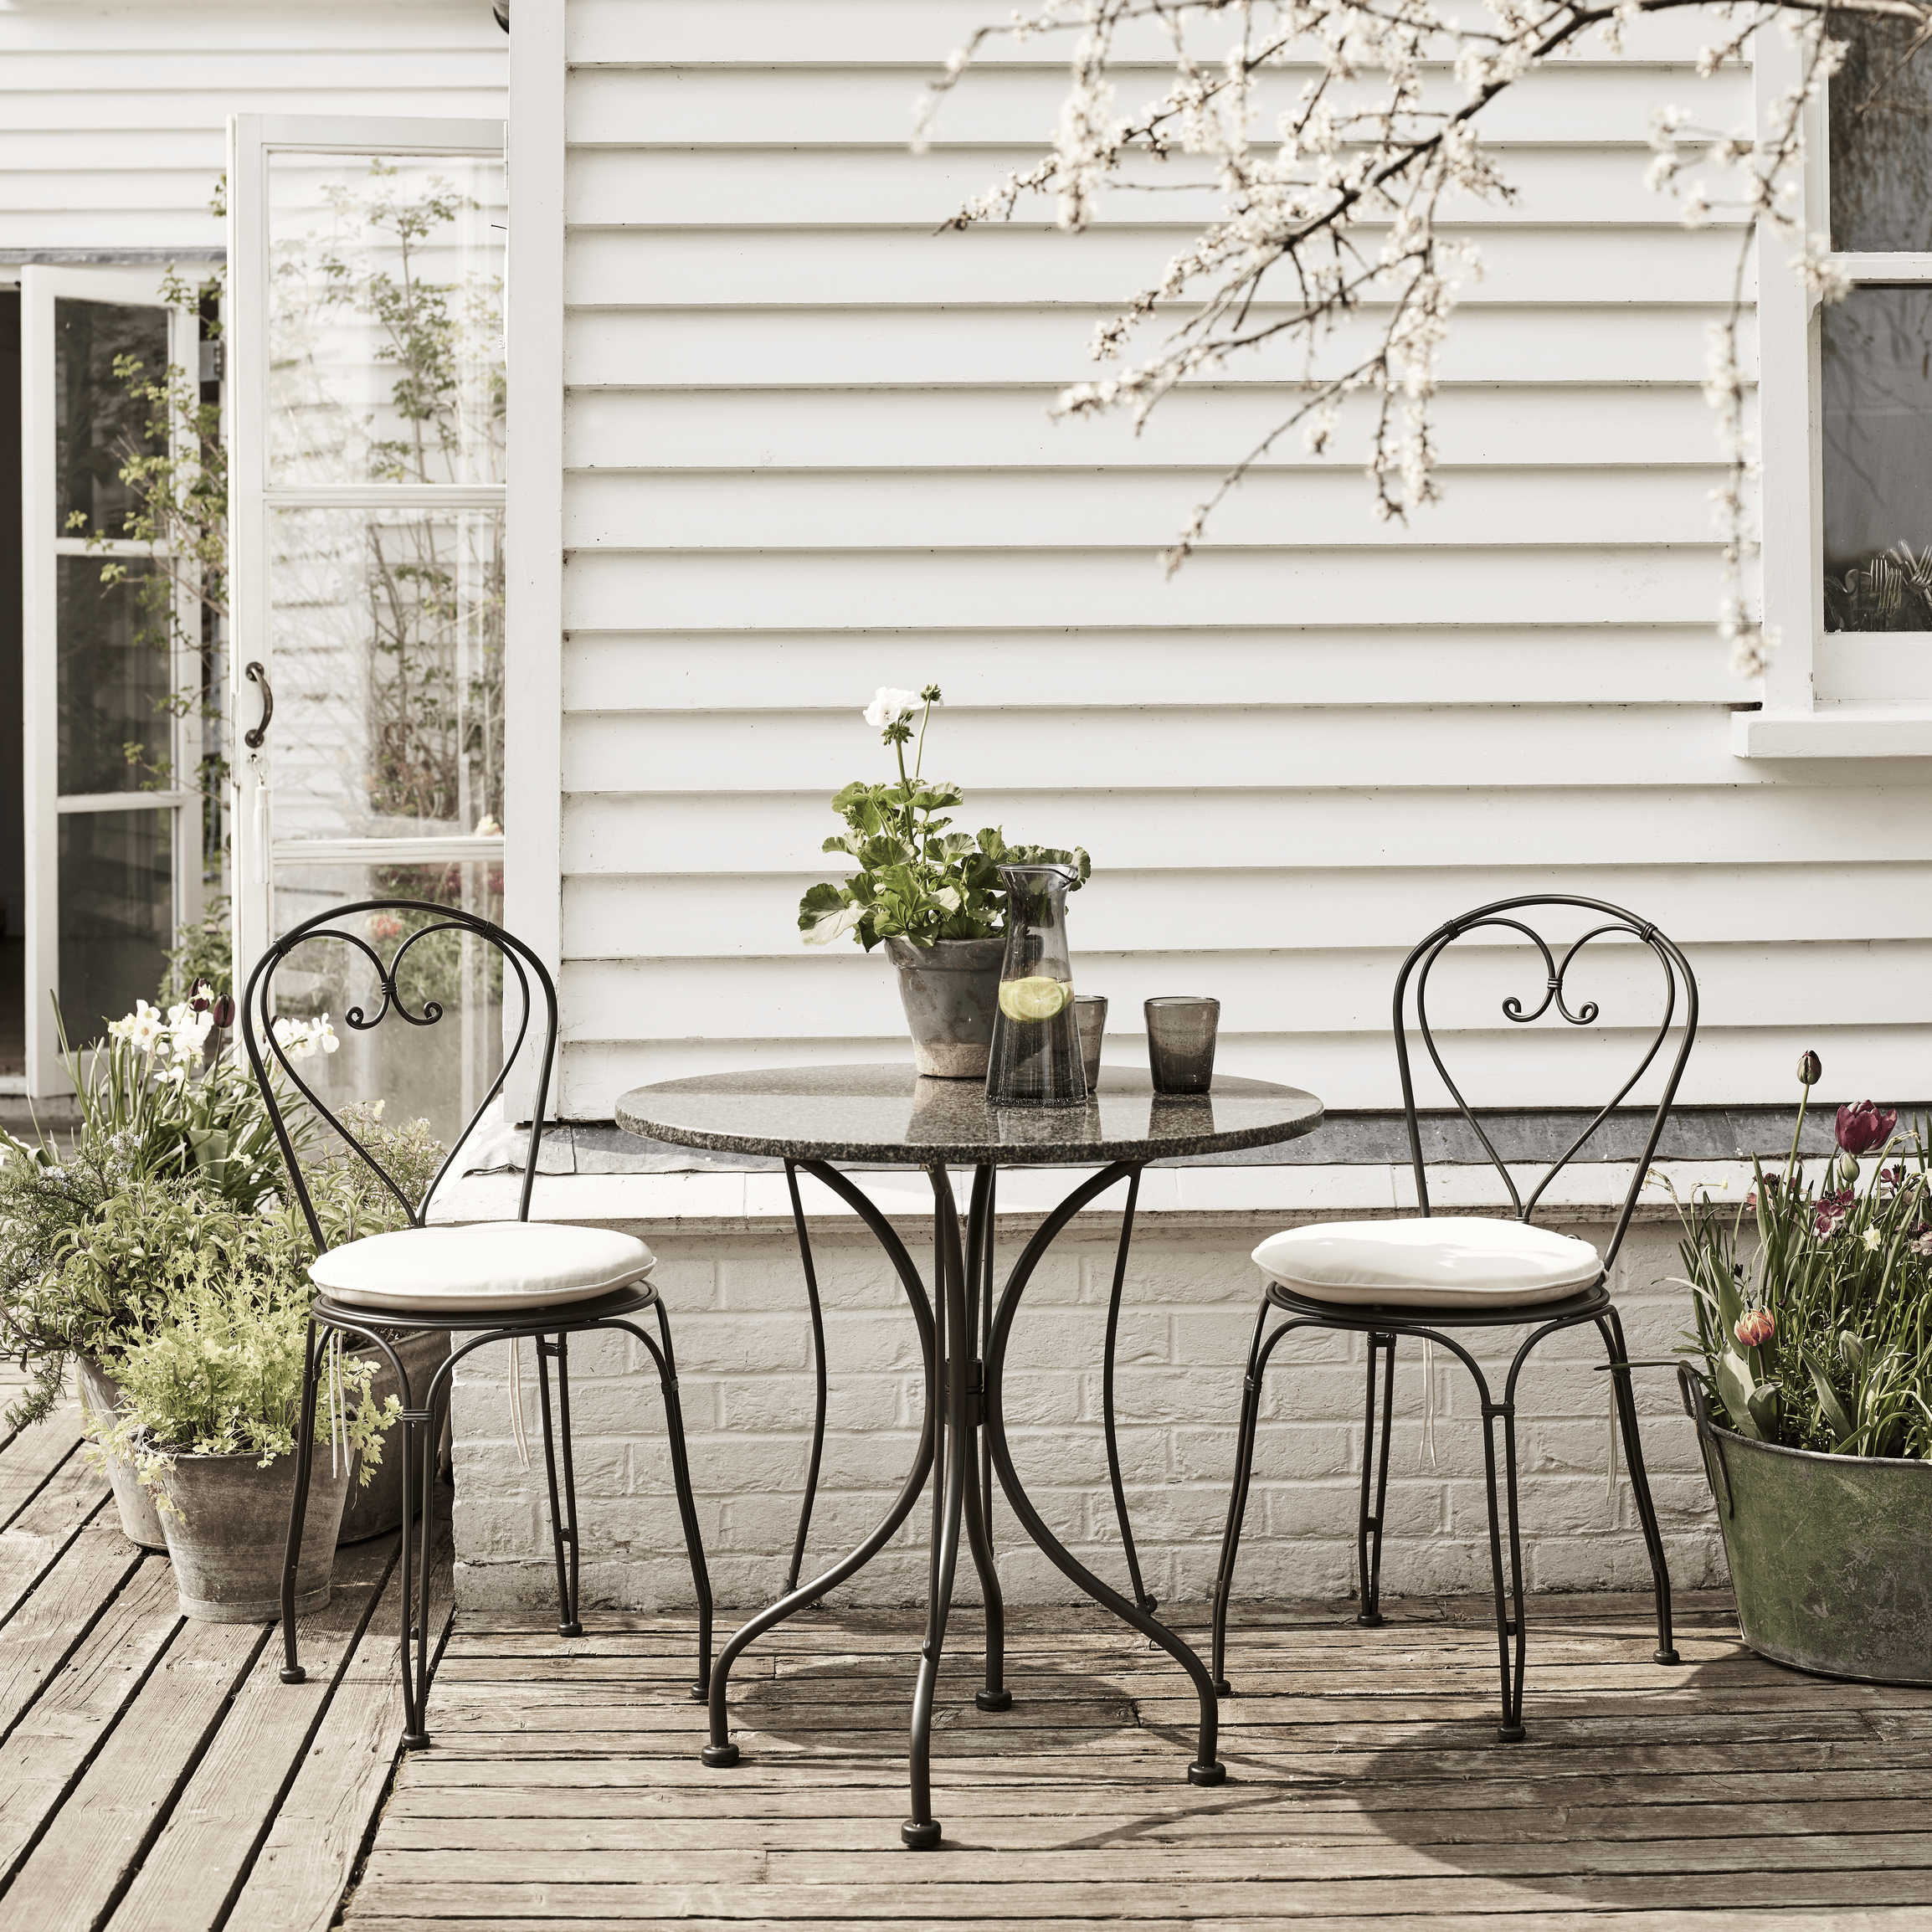 A Complete Set for Your Outdoor Oasis: Garden Table and Chairs Ensemble